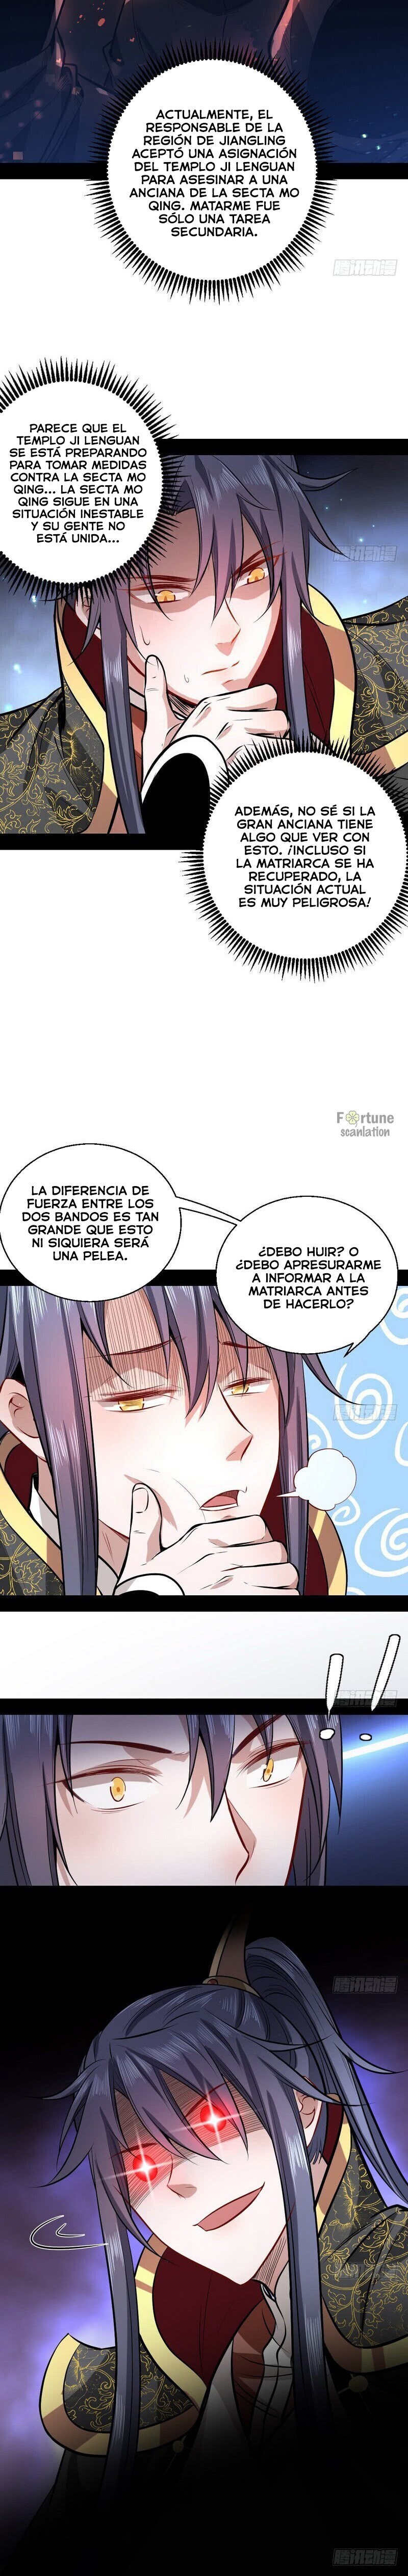 Manga Soy un dios maligno Chapter 32 image number 13